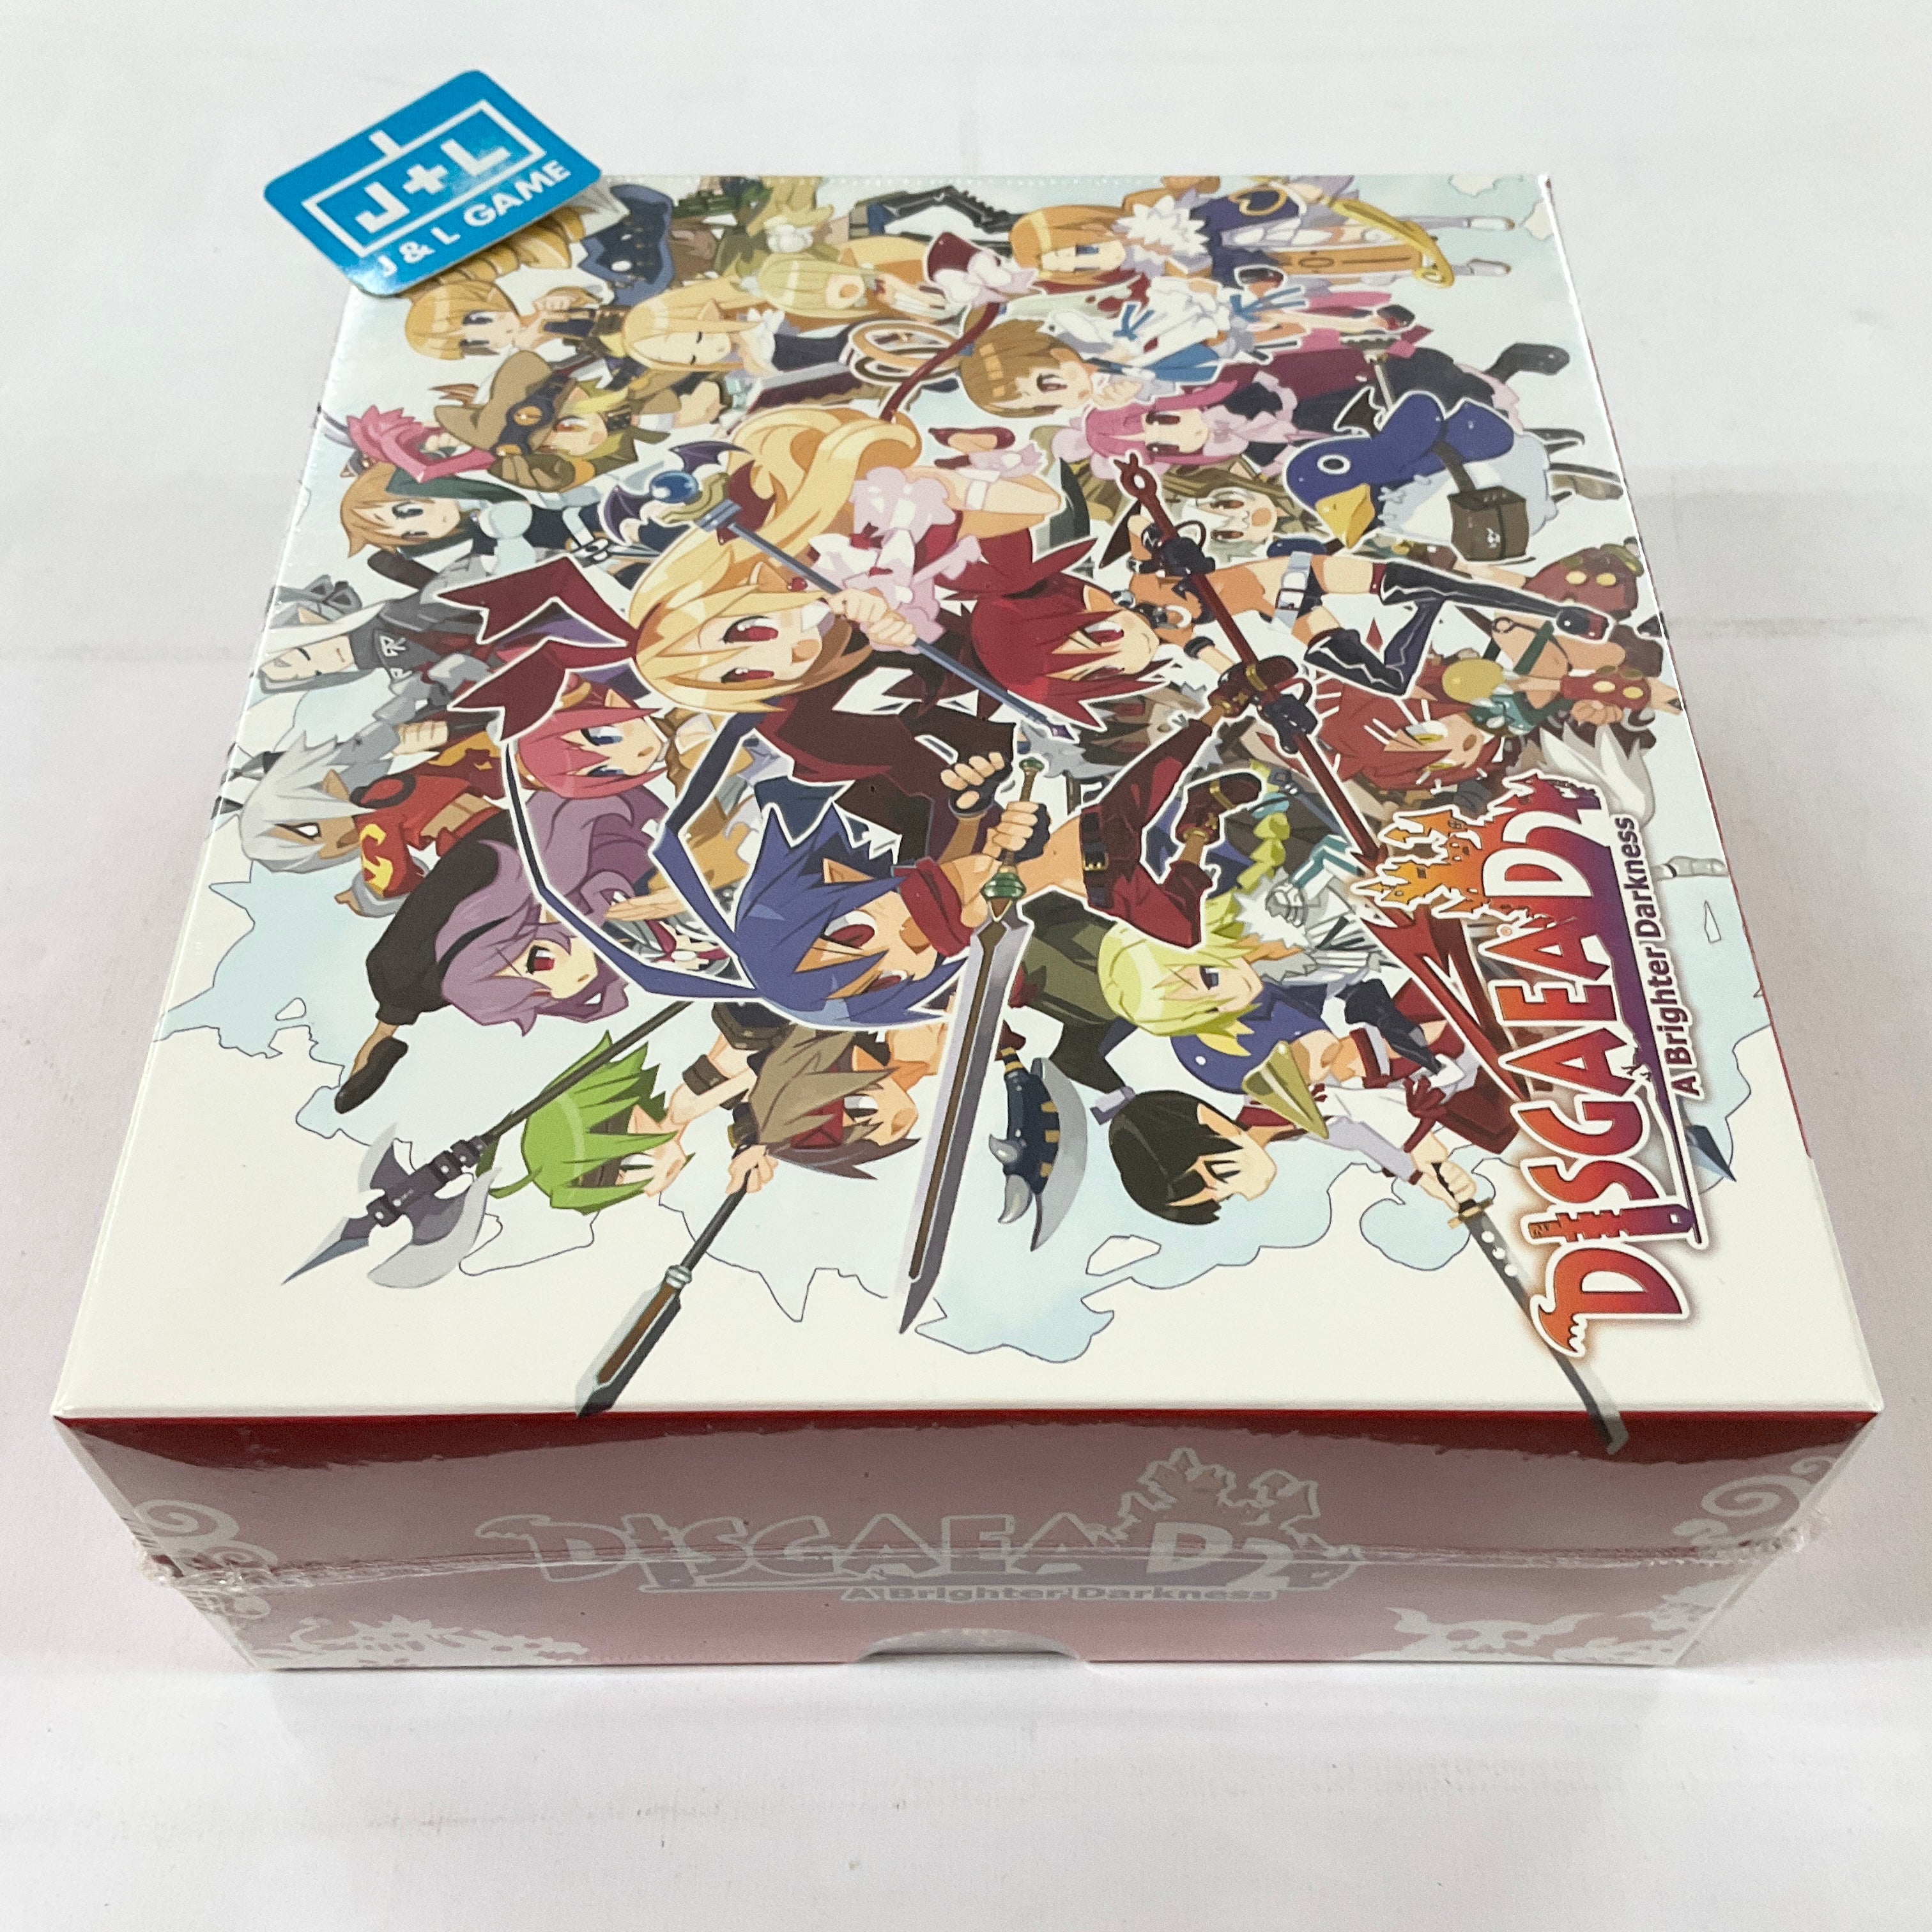 Disgaea D2: A Brighter Darkness (Limited Edition) - (PS3) PlayStation 3 Video Games NIS America   